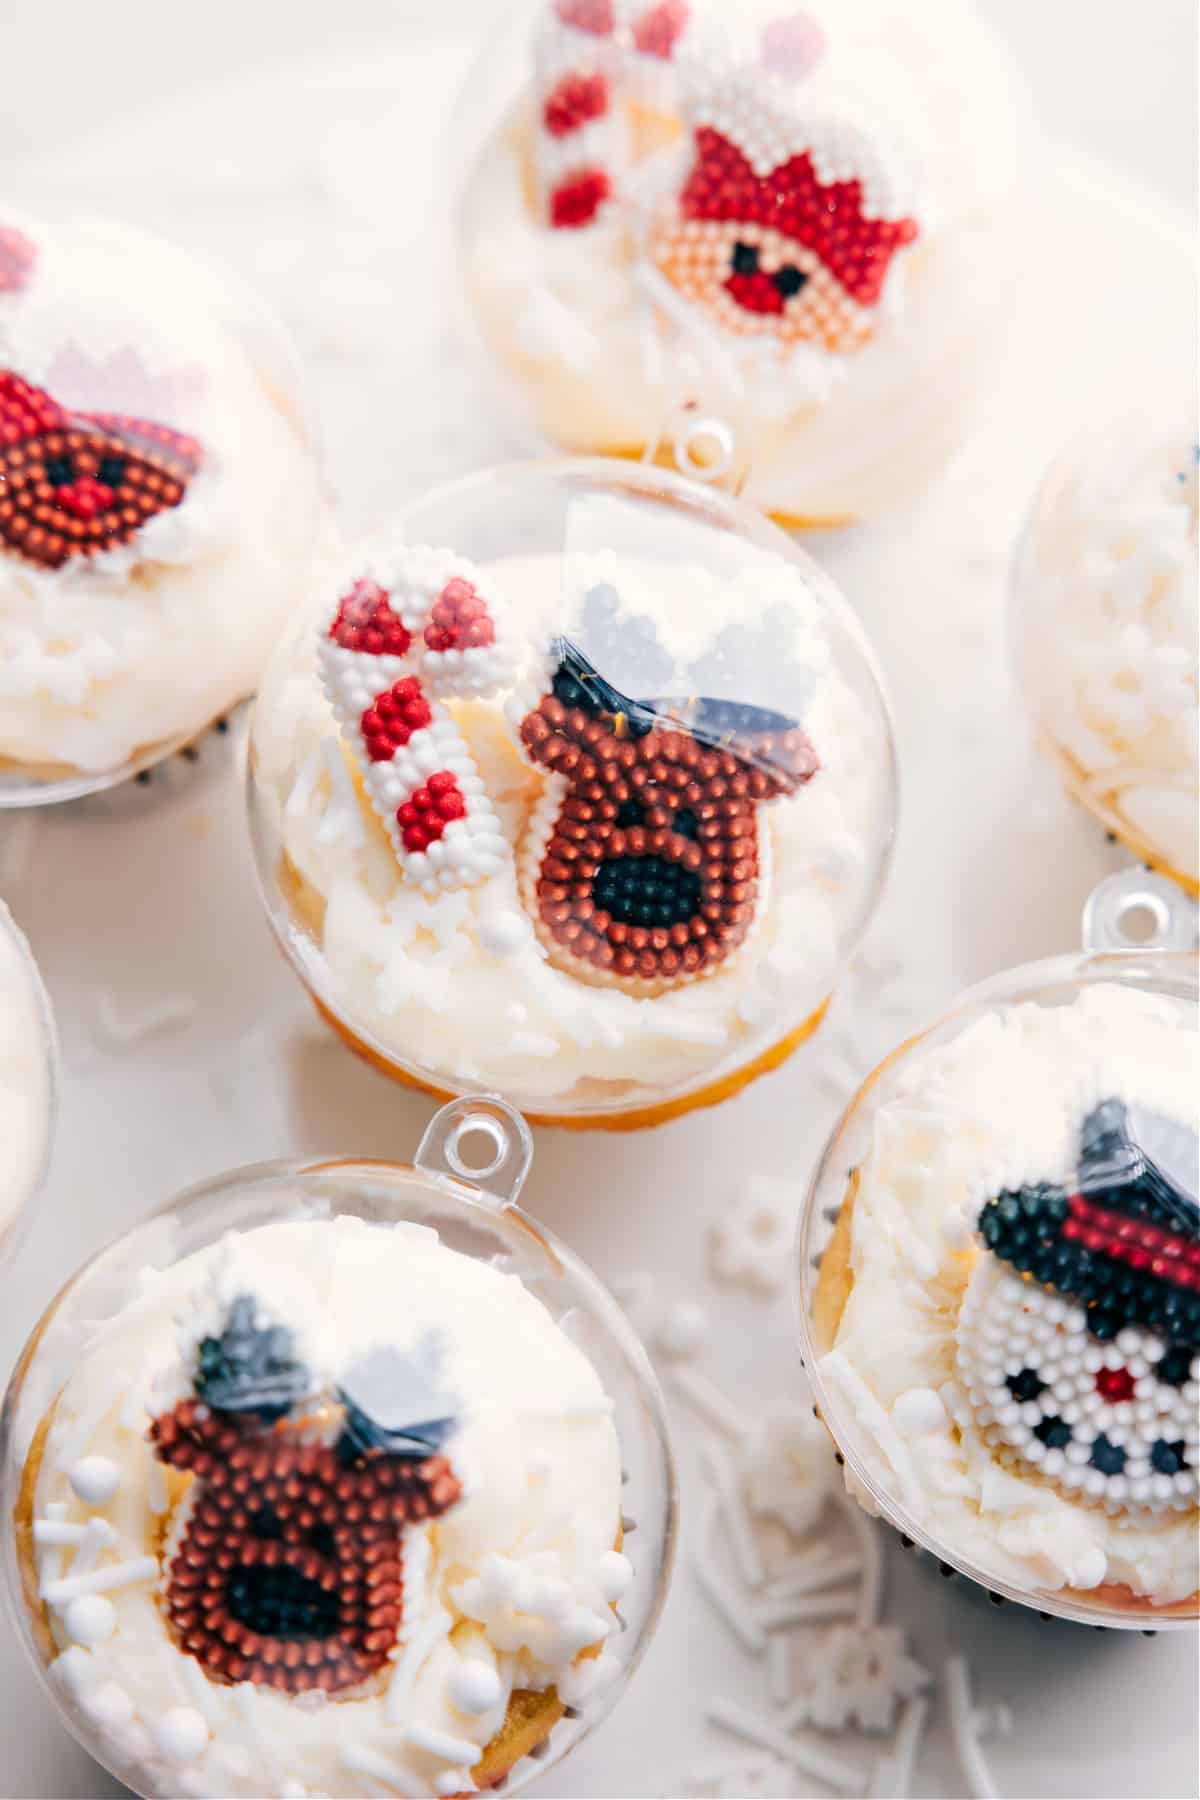 The festive desserts, showcasing adorable reindeer and candy cane toppings, resembling a snow globe in design.